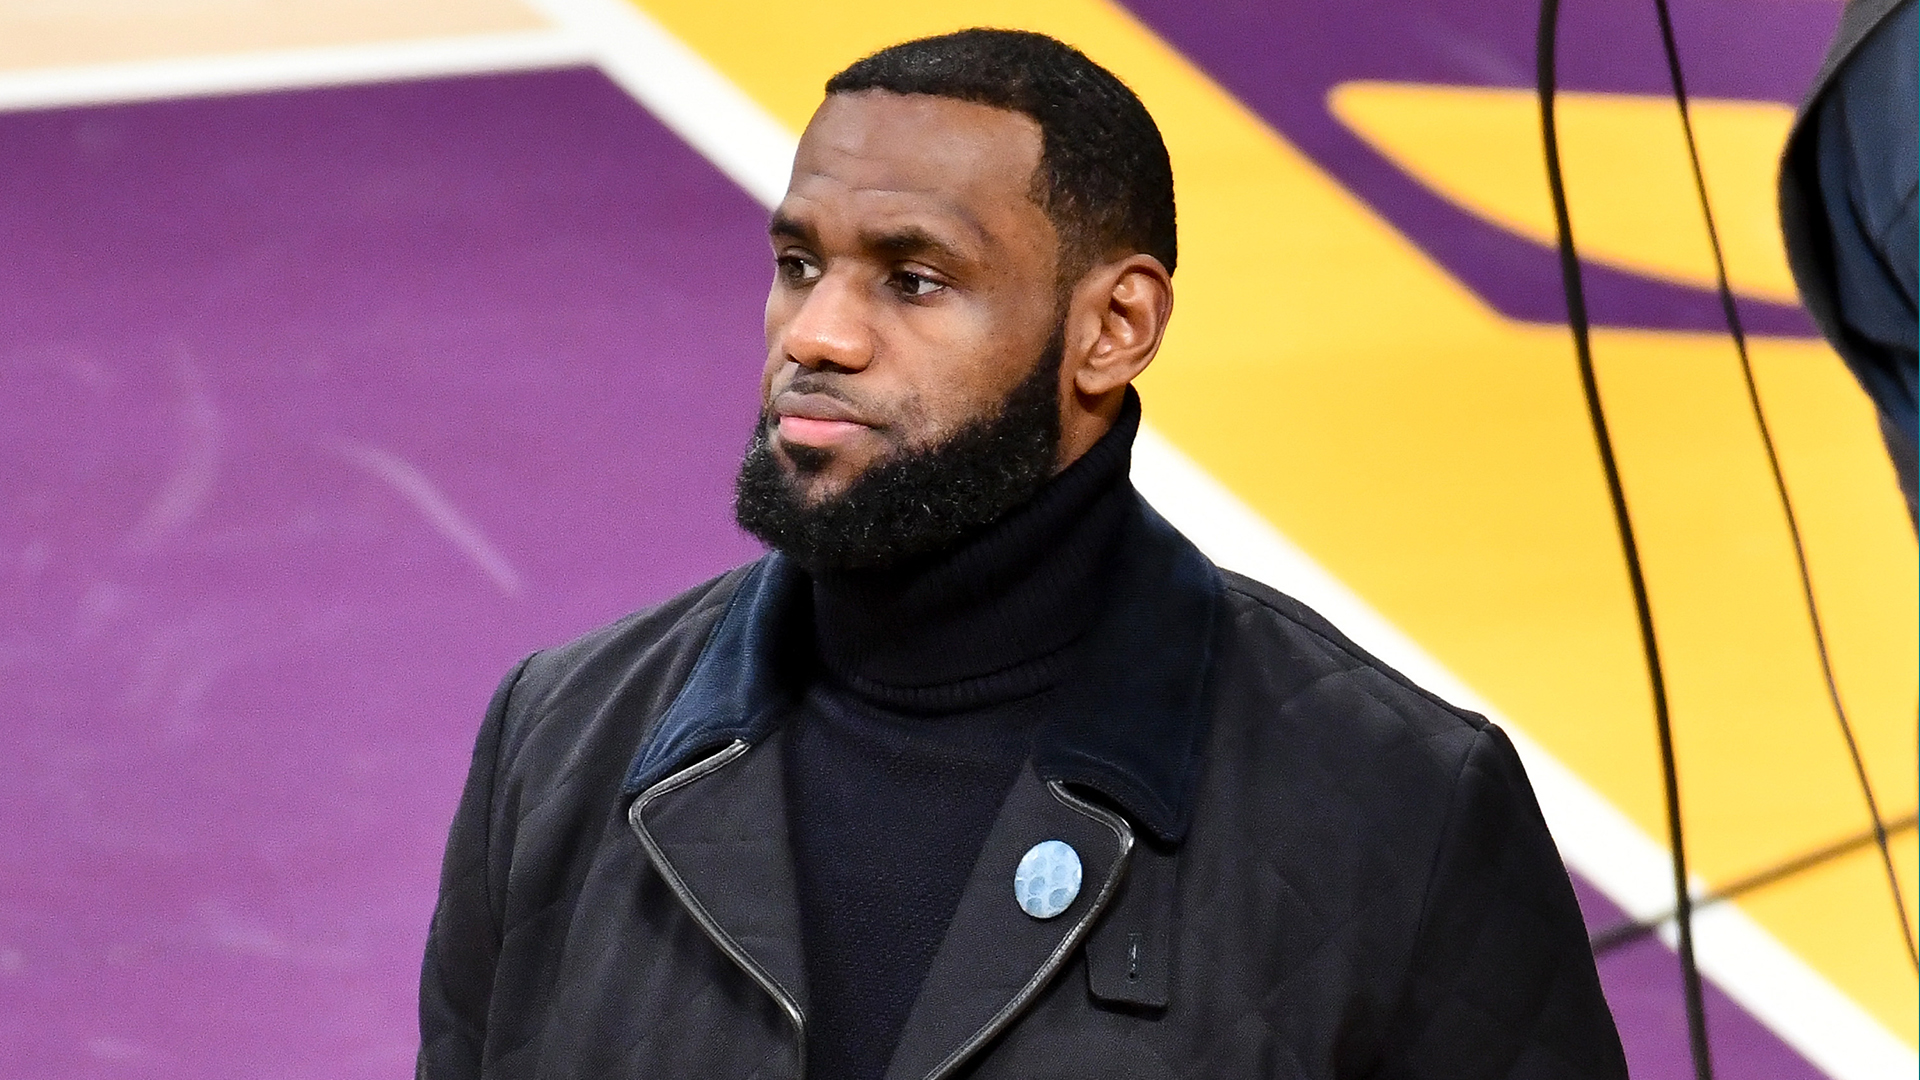 NBA Star LeBron James Once Said His 'Goal Is To Own An NBA Franchise' — So, Will He Set Up A Team In Vegas?